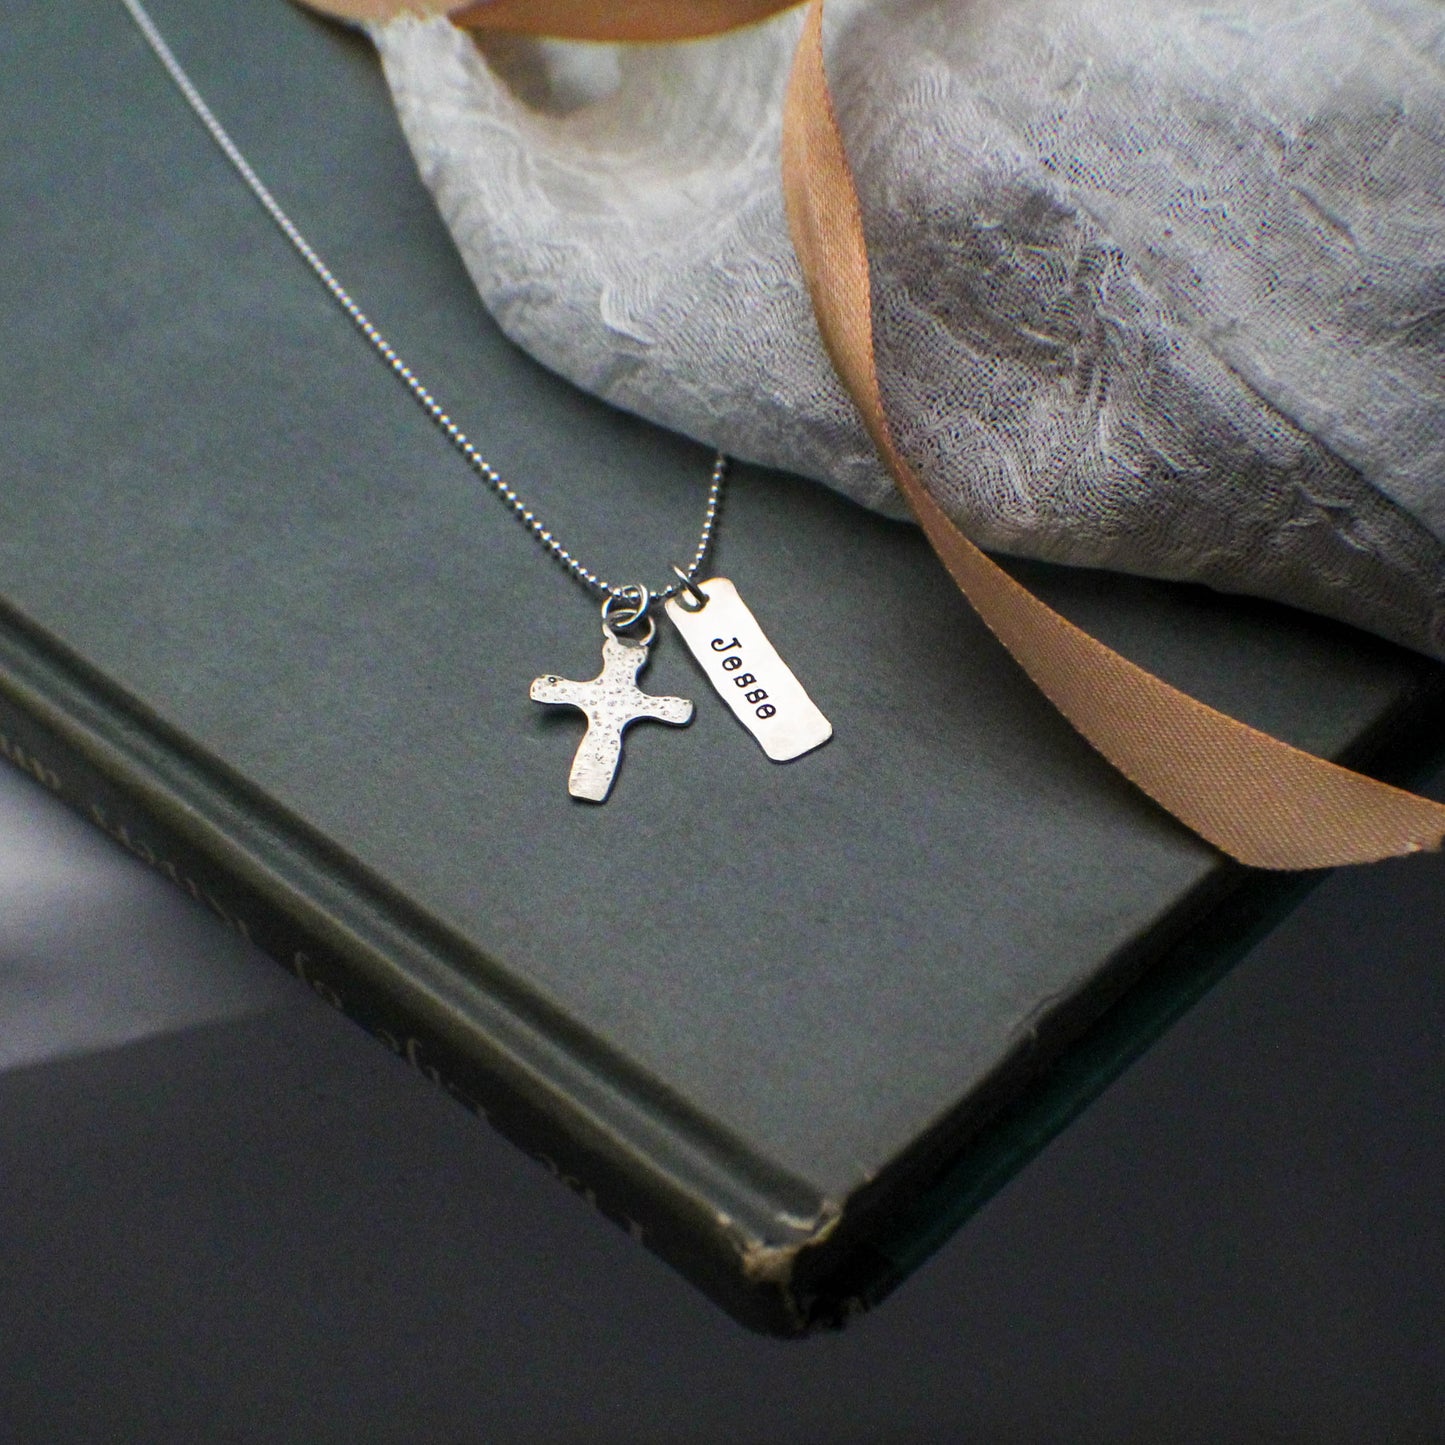 Personalized Boys Cross Necklace, Boys Confirmation or First Communion Gift, Hammered Silver Cross with Name Necklace for Boys, Hand Stamped